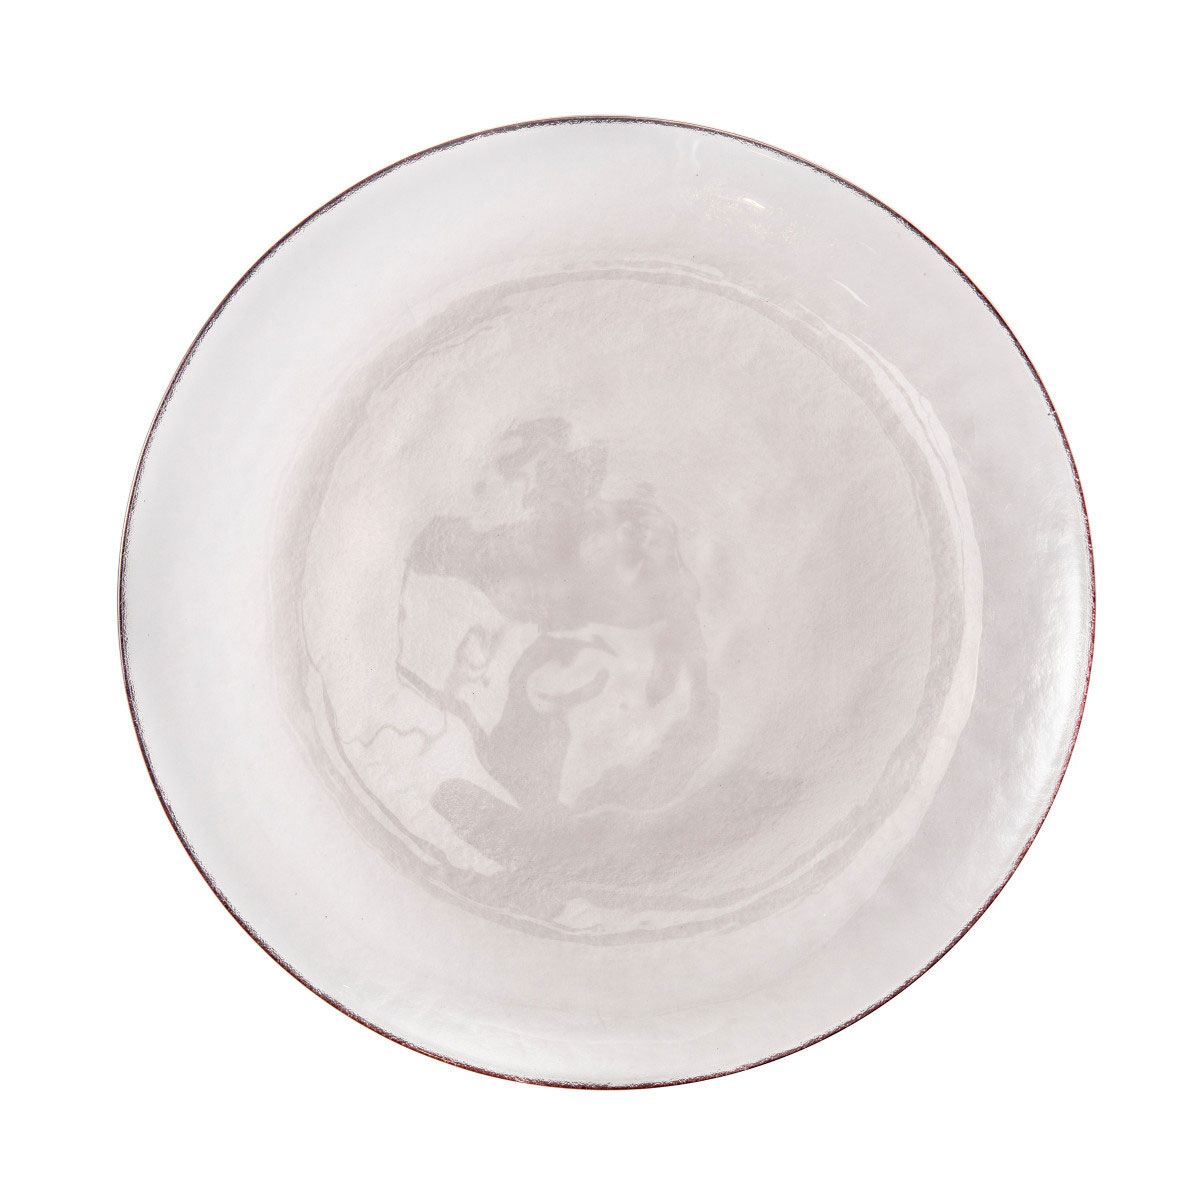 Fortessa Glass Los Cabos Pink Dinner Plate, Single